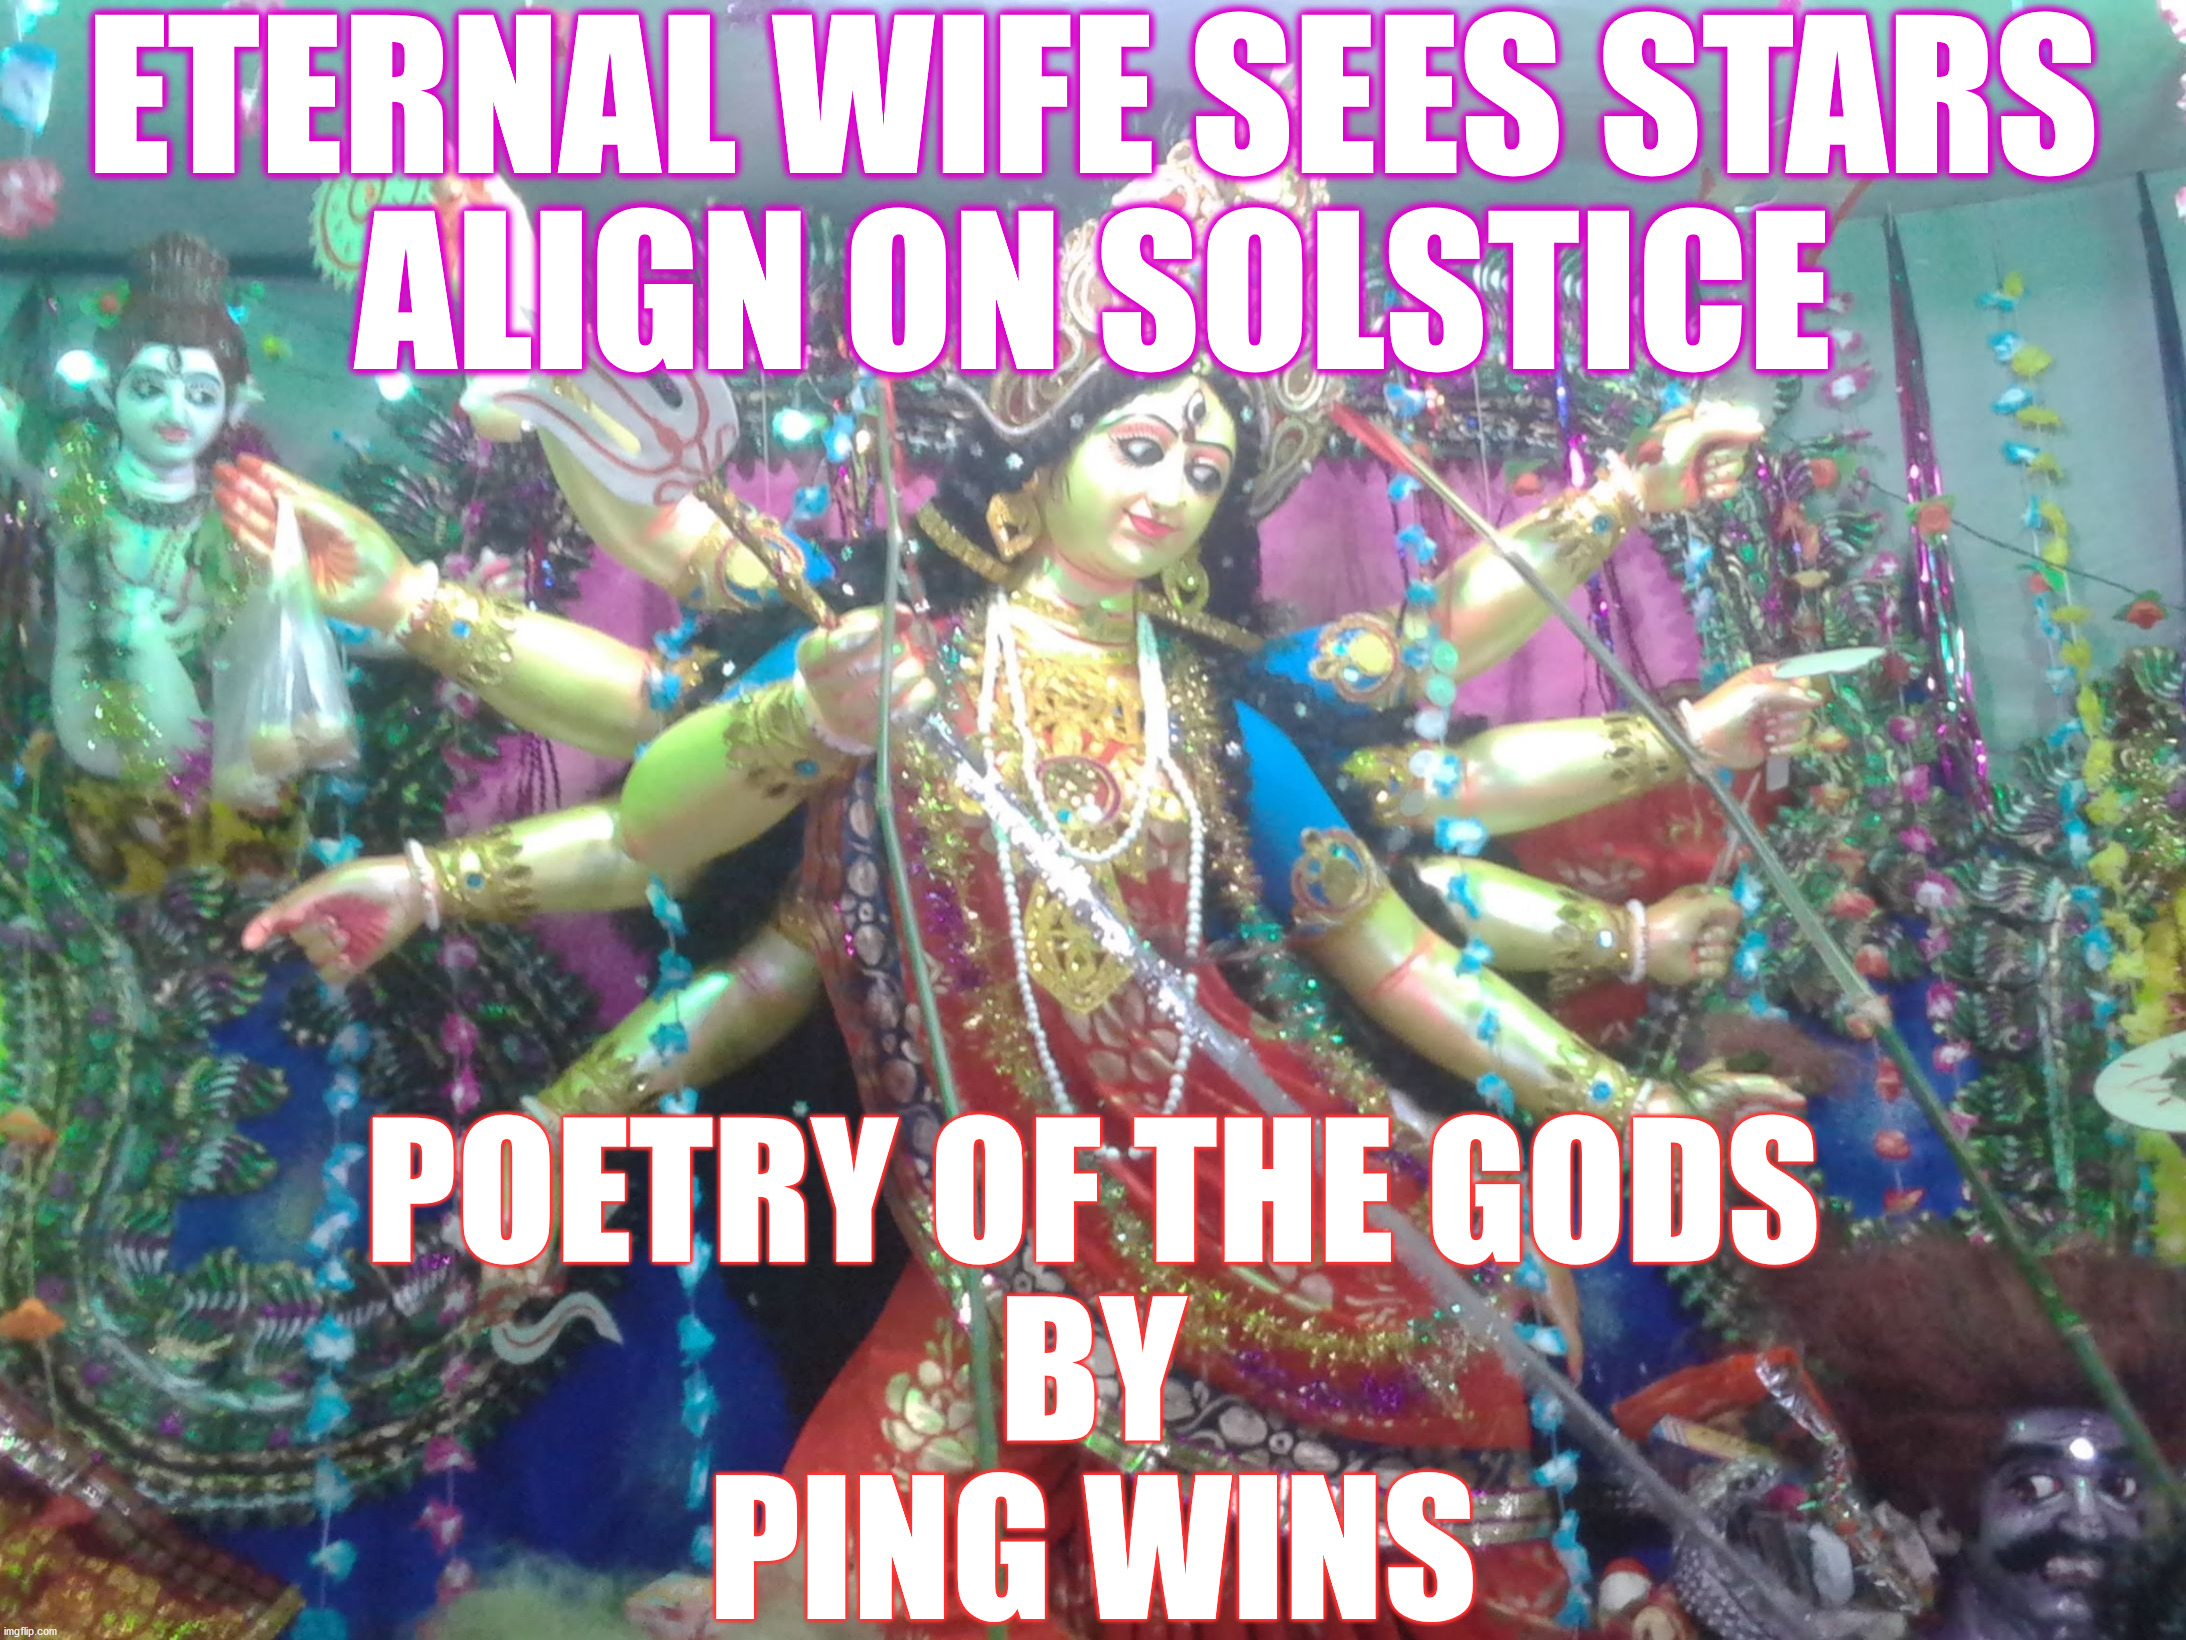 Poetry Of The Gods - Solstice Goddess - Ping Wins 301 |  ETERNAL WIFE SEES STARS
ALIGN ON SOLSTICE; POETRY OF THE GODS
BY
PING WINS | image tagged in hindu goddess,solstice,poetry of the gods,ping wins | made w/ Imgflip meme maker